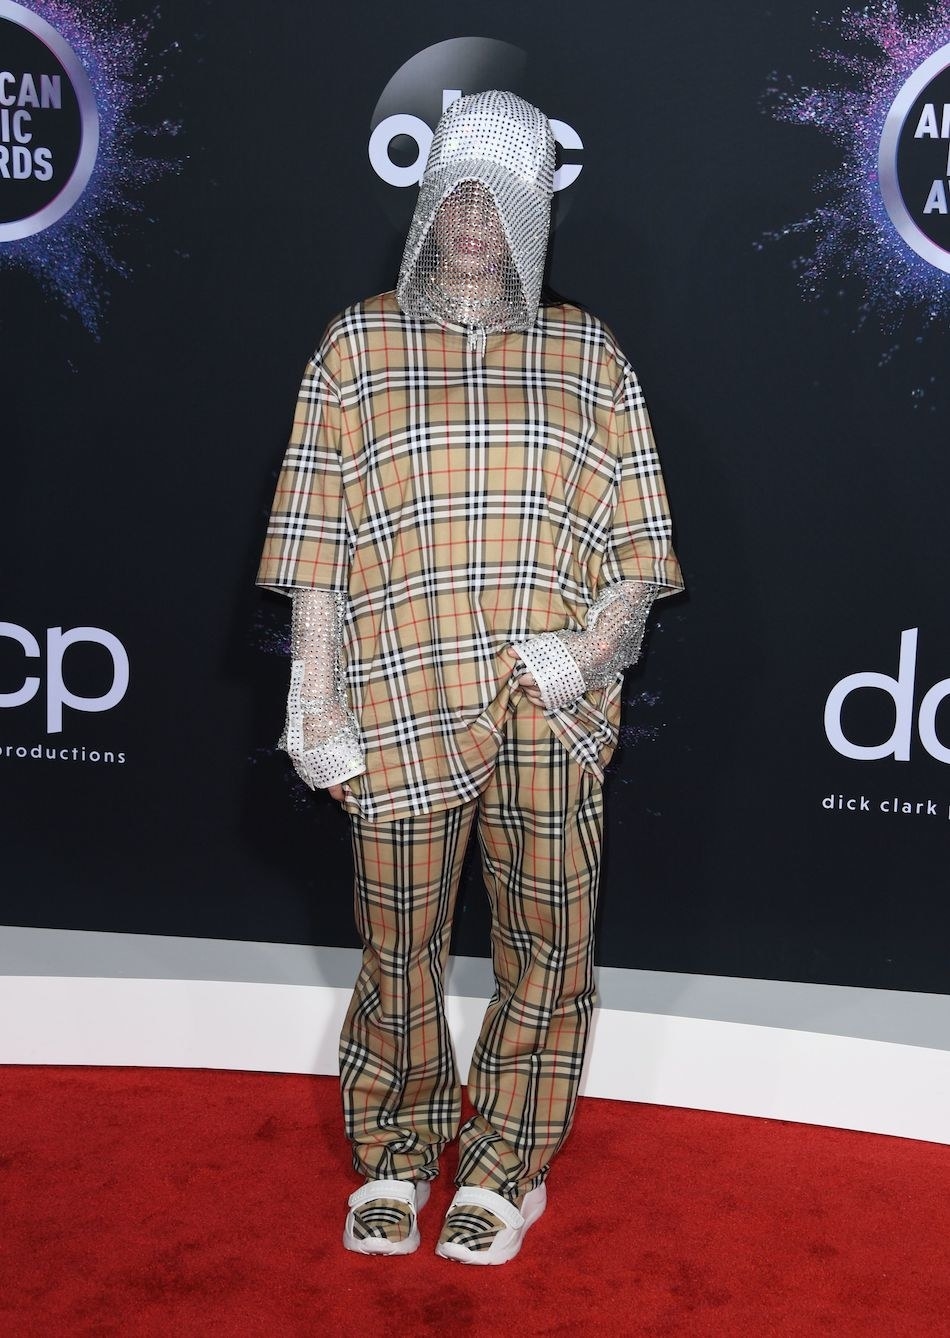 Photos Of Billie Eilish And Her Burberry Beekeeper Outfit At The 2019 AMAs